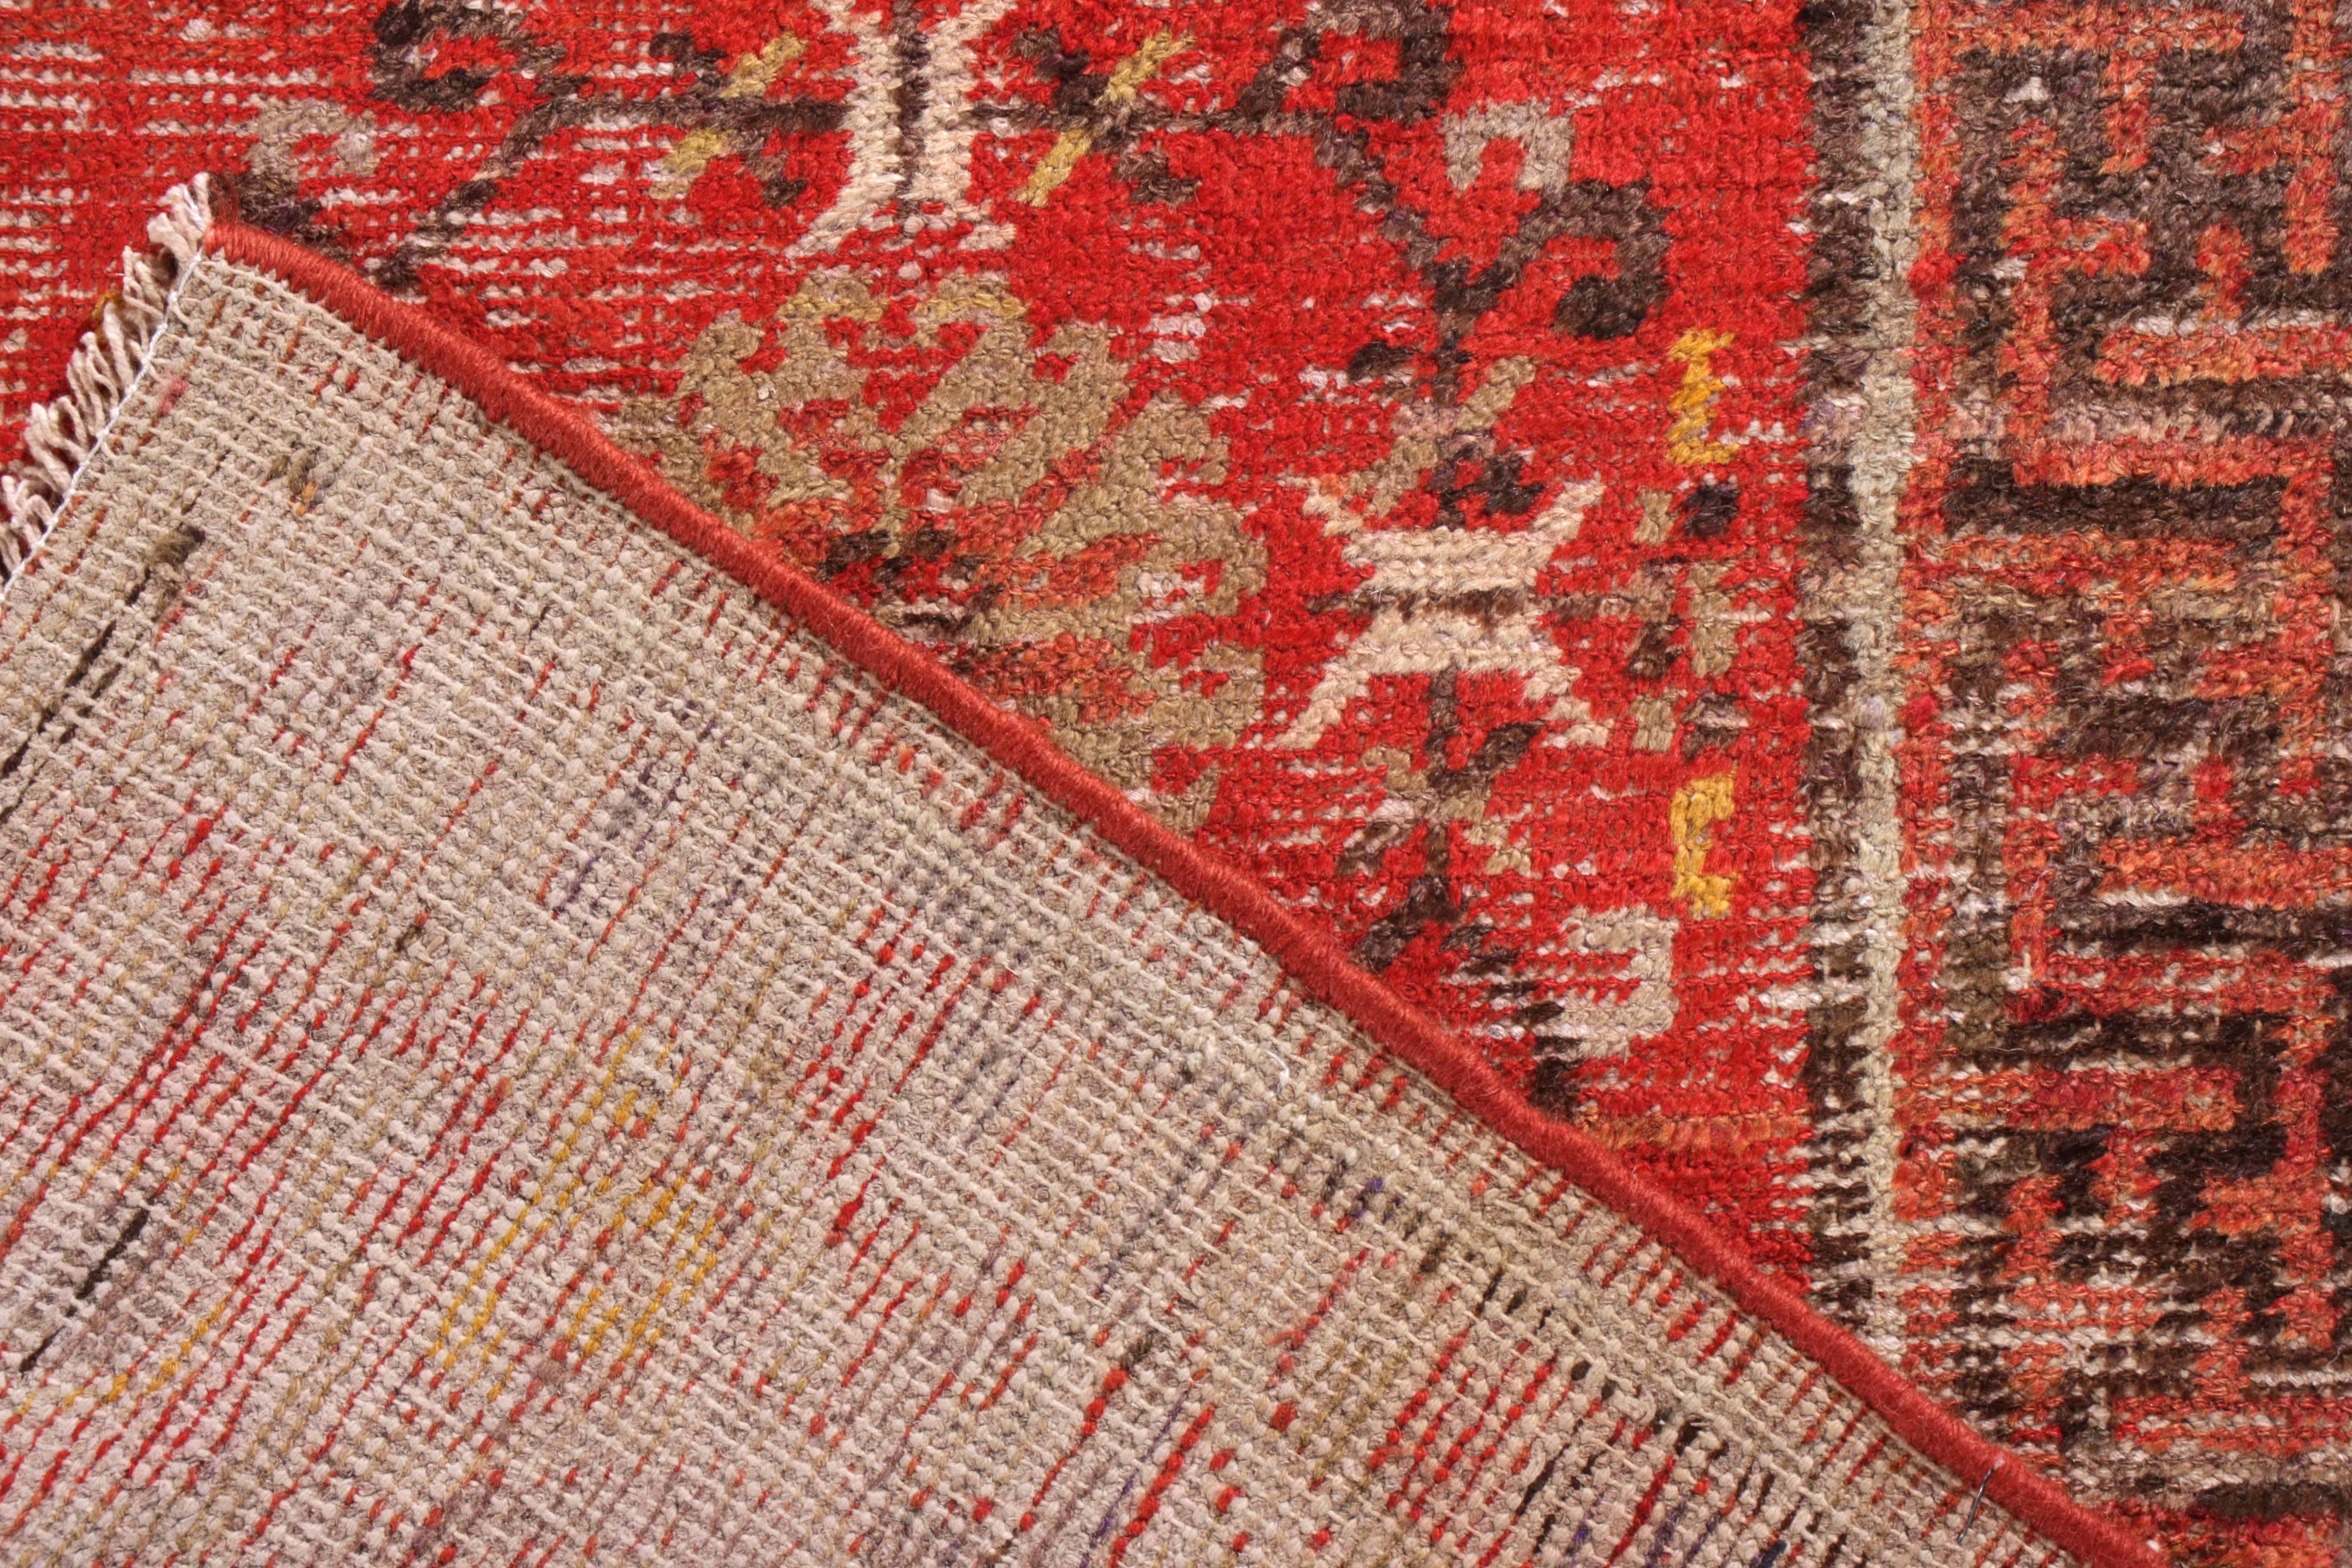 Early 20th Century Hand-Knotted Antique Khotan Rug in Red and Gold with Medallion Patterns